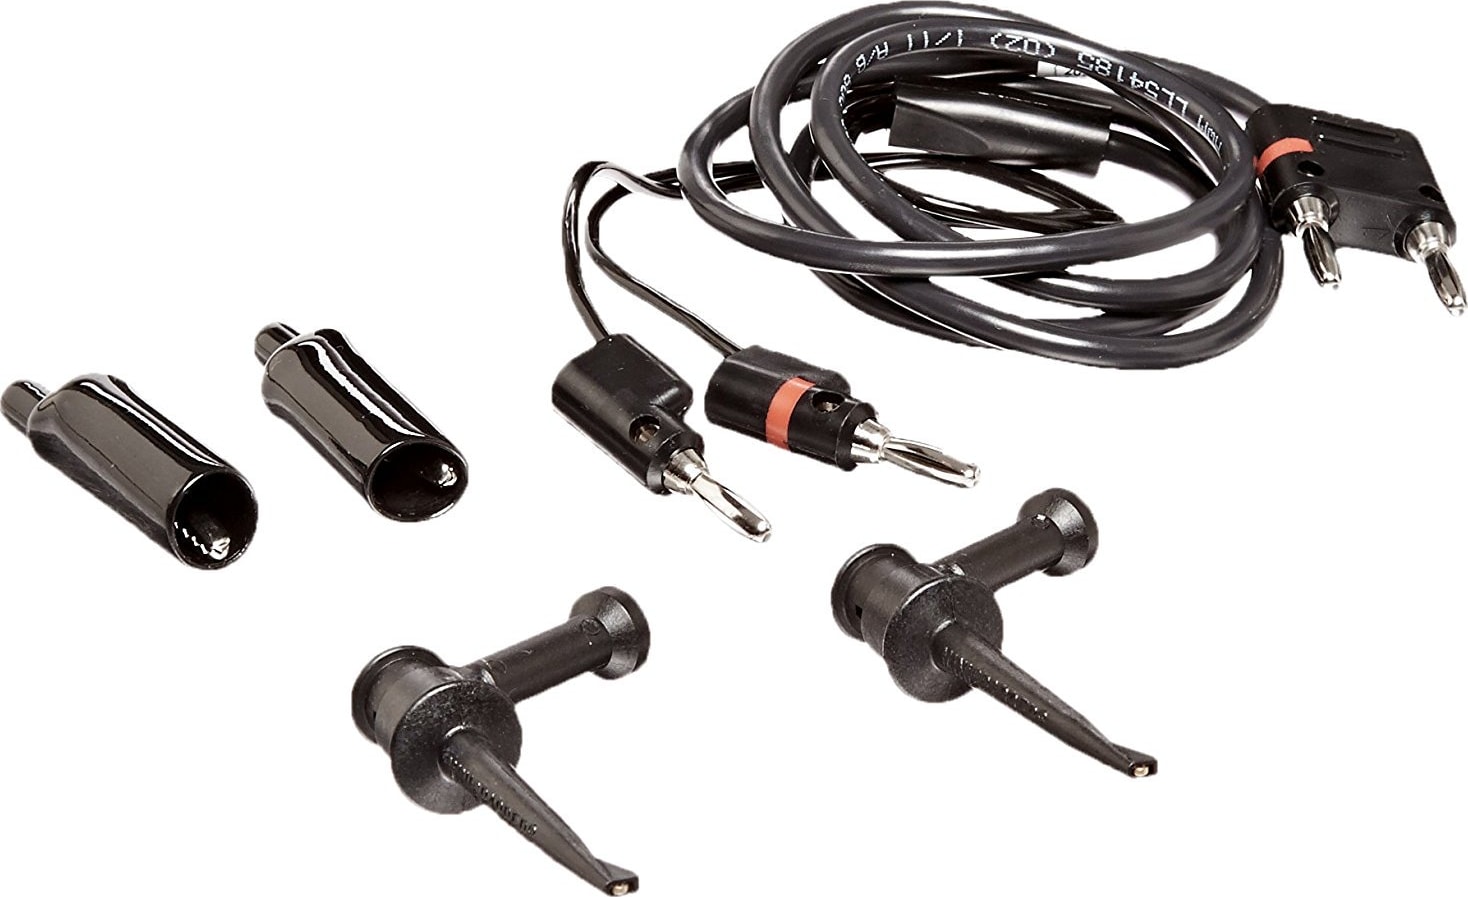 Emerson TREX-0004-0001 Lead set with connectors for AMS TREX, 475, and 375 Field Communicators